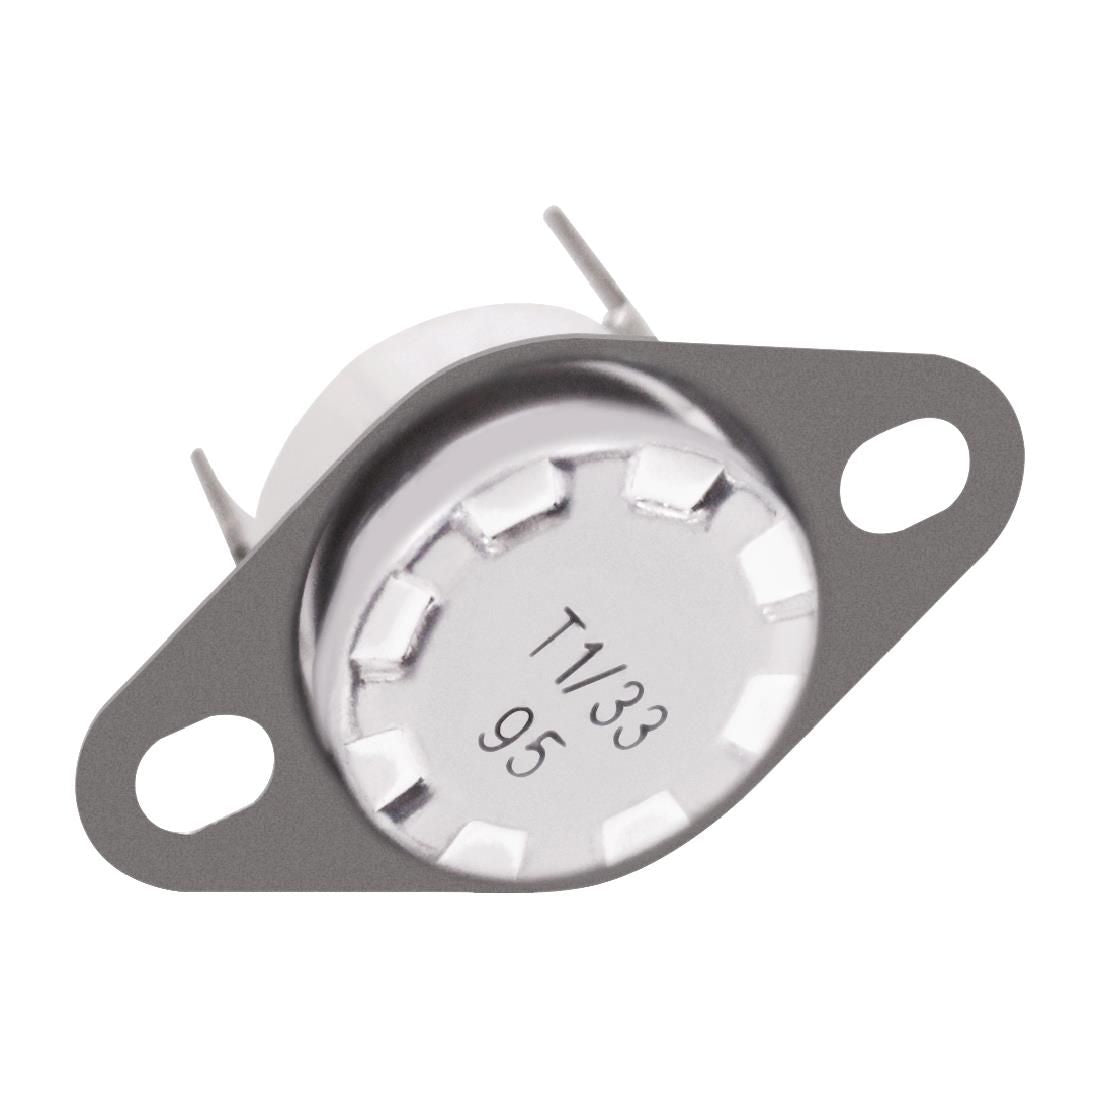 Buffalo Thermostat Fits CW146 JD Catering Equipment Solutions Ltd